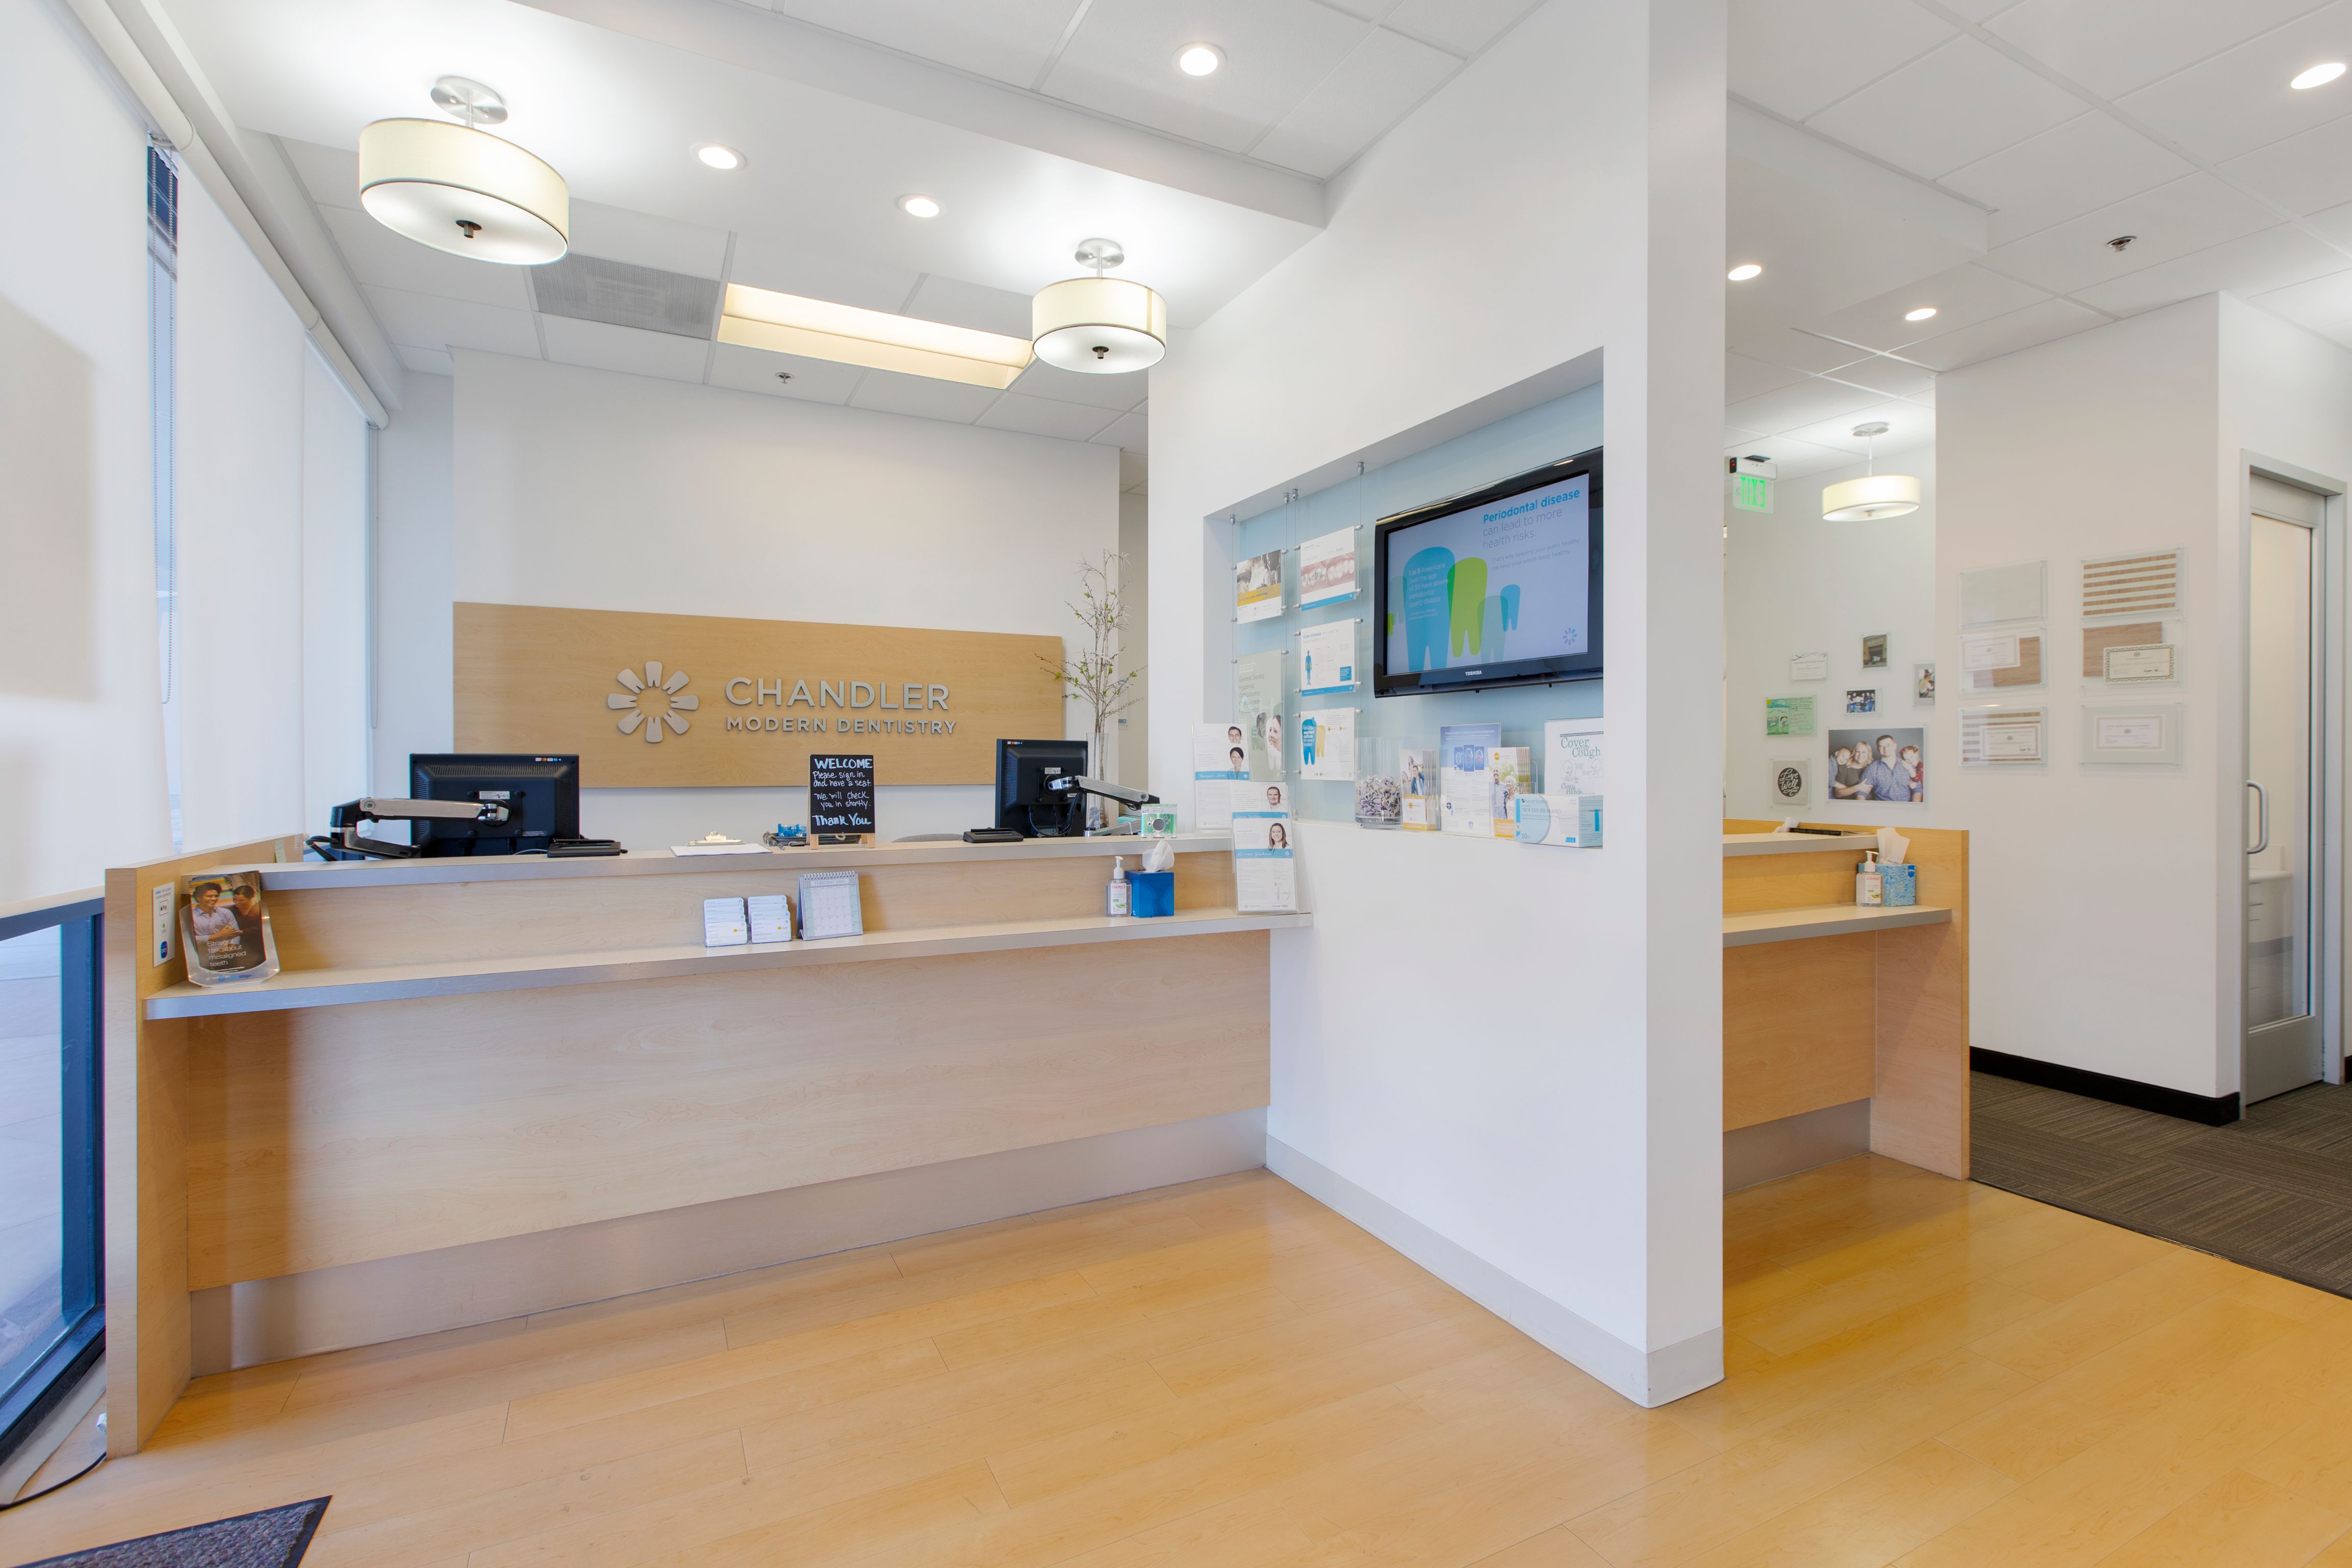 Chandler Modern Dentistry opened its doors to the Chandler community in July 2013!